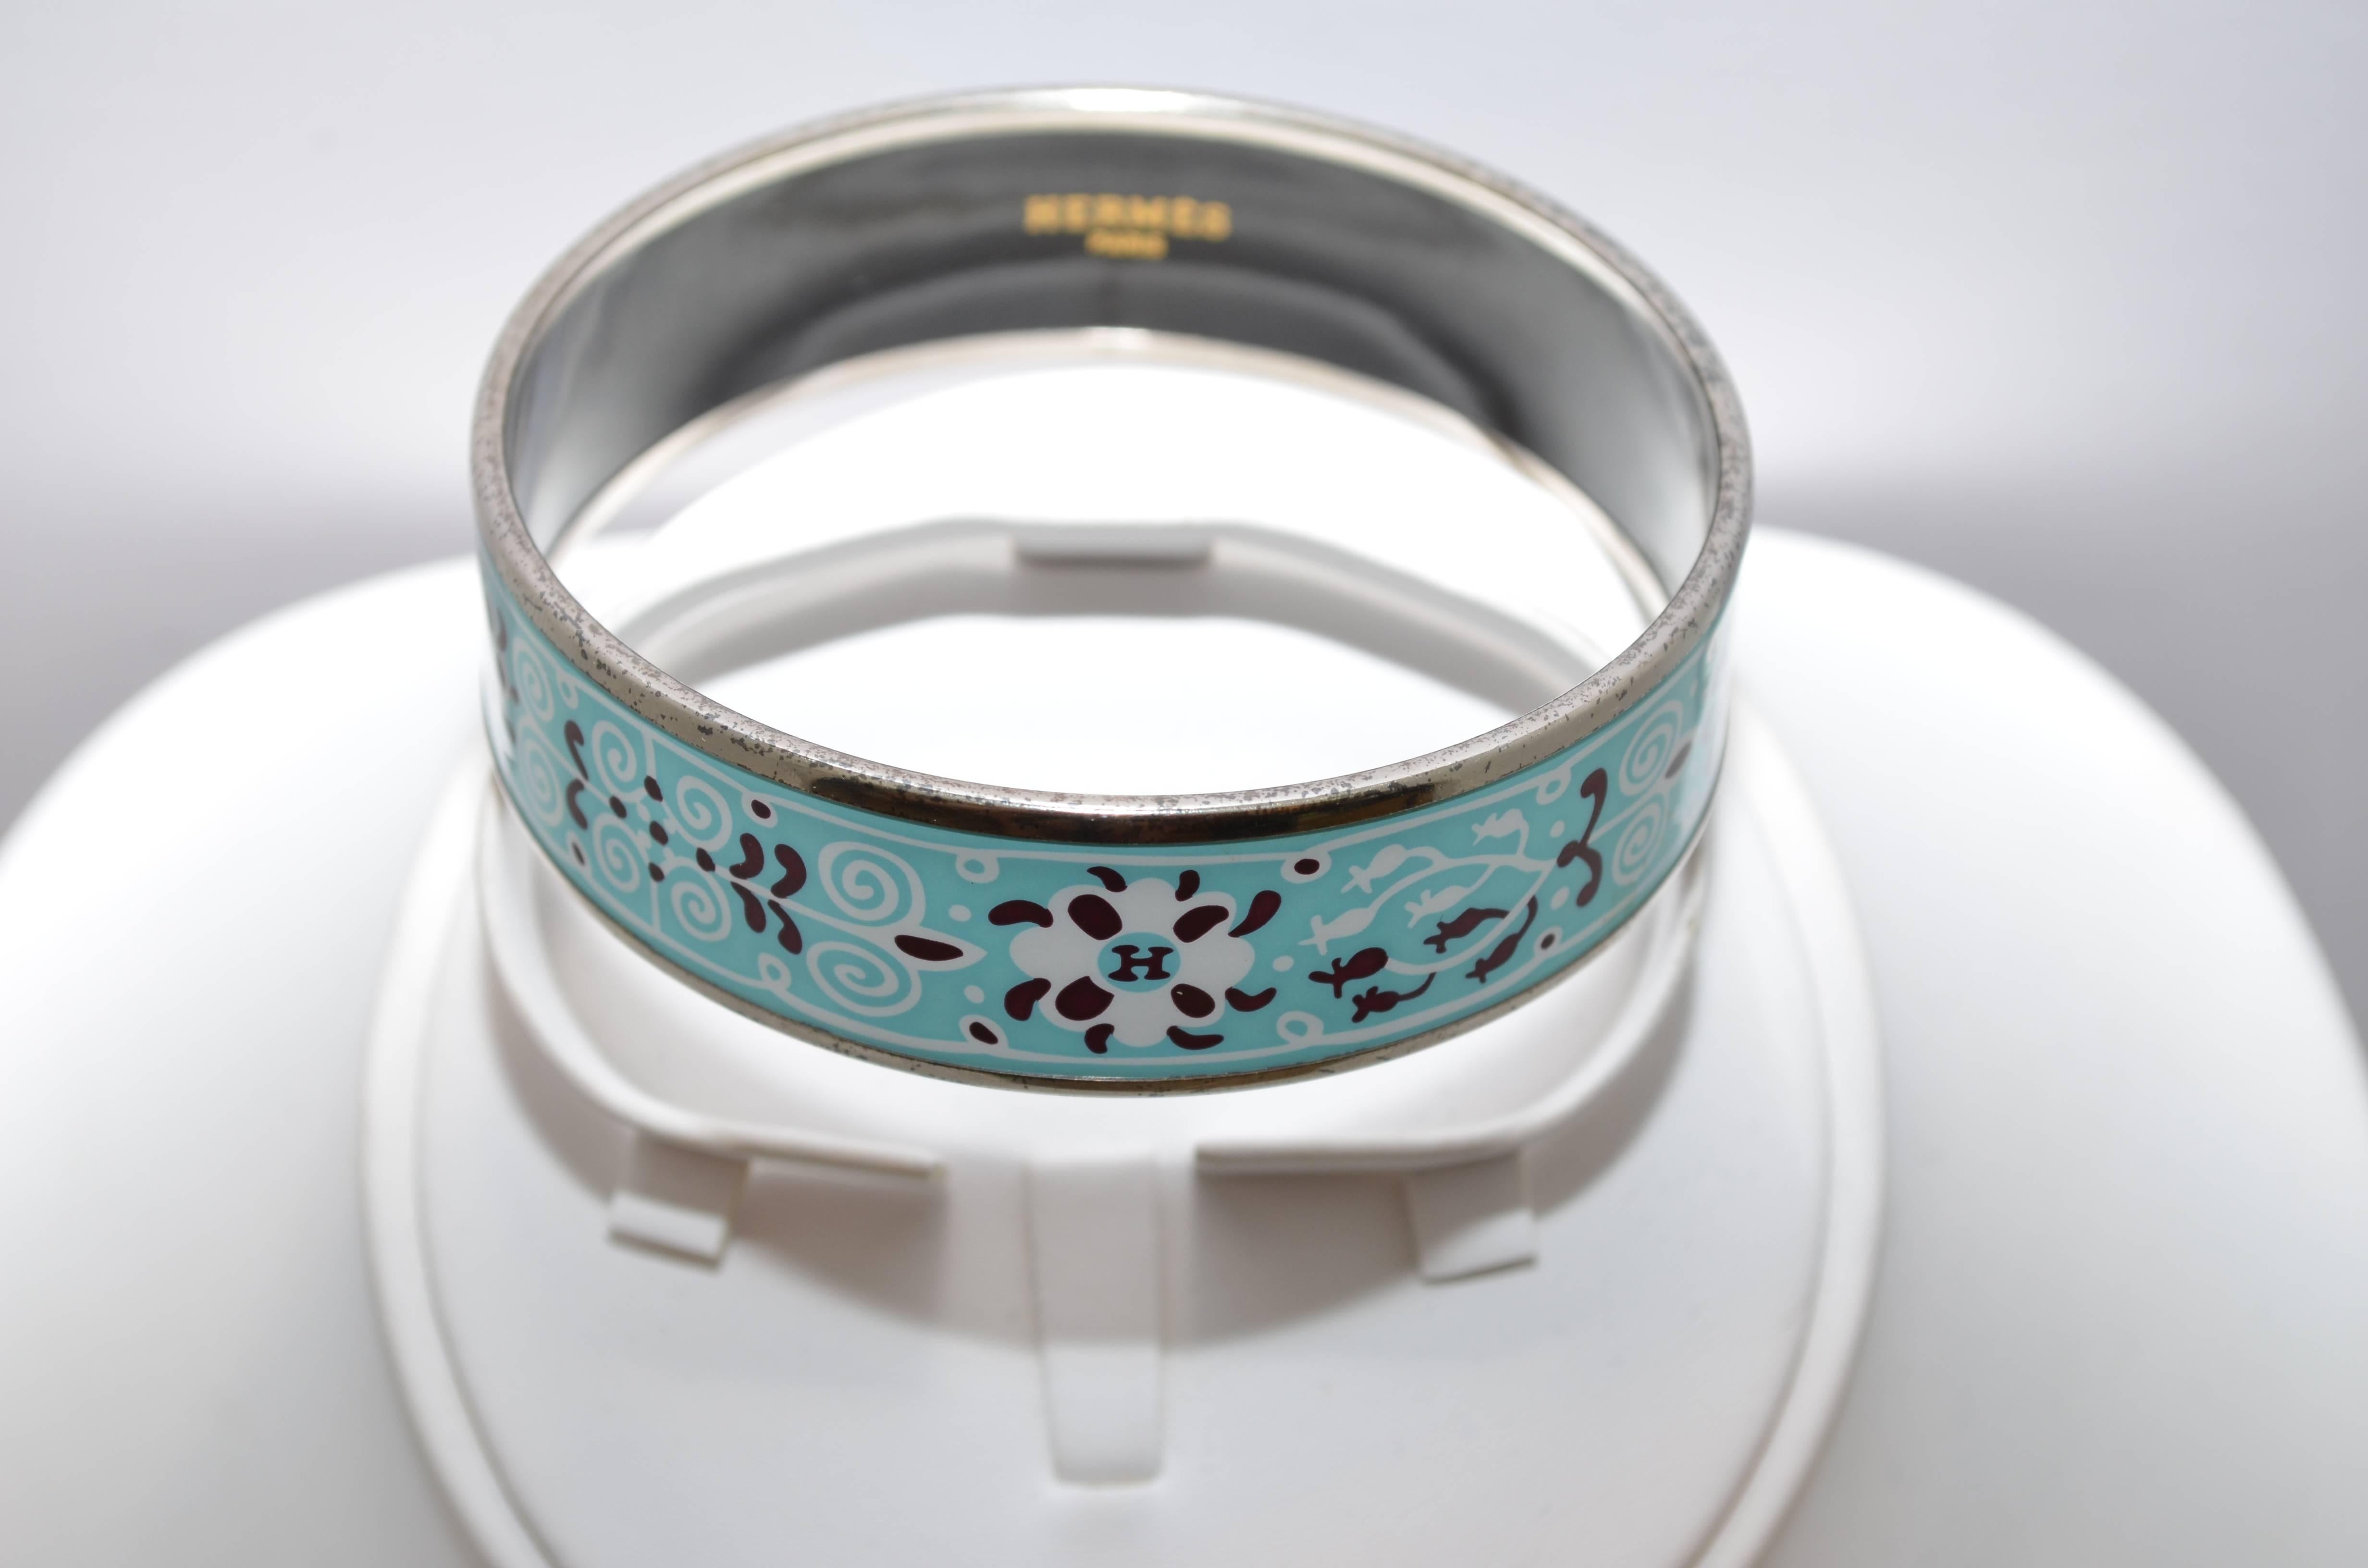 Hermes Paris Turquoise Enamel Print Bangle Bracelet size 70 Large Hermes Paris silver-tone metal bangle features a turquoise background with a print on the enamel, and is made in Austria. Diameter measures 7 centimeters (2.75 inches), width is 2